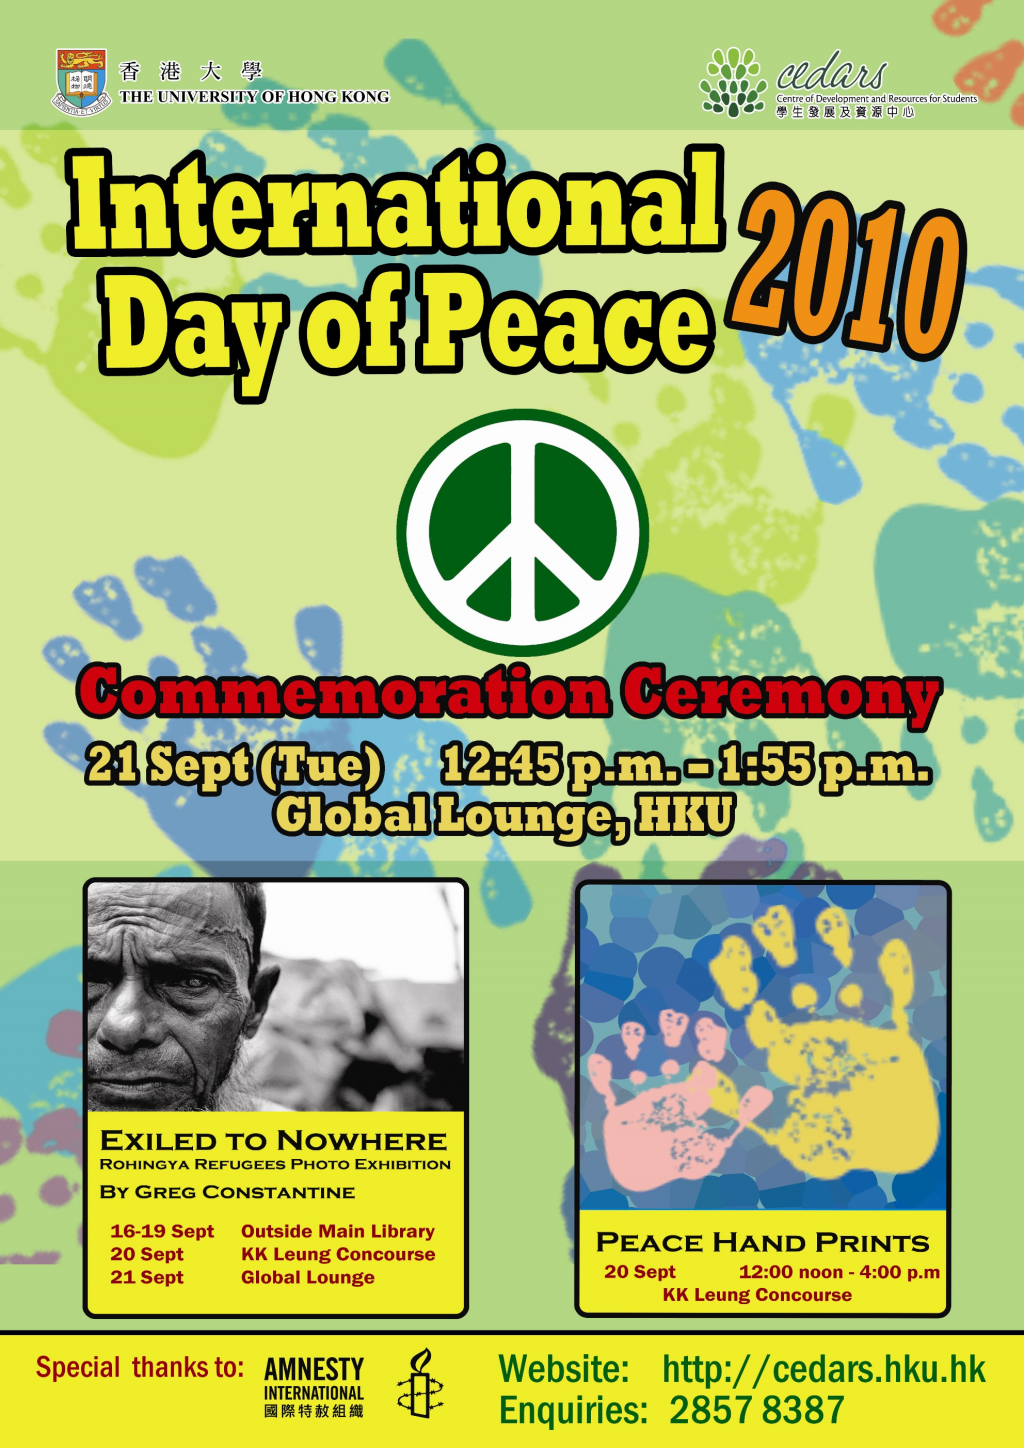 International Day of Peace 2010